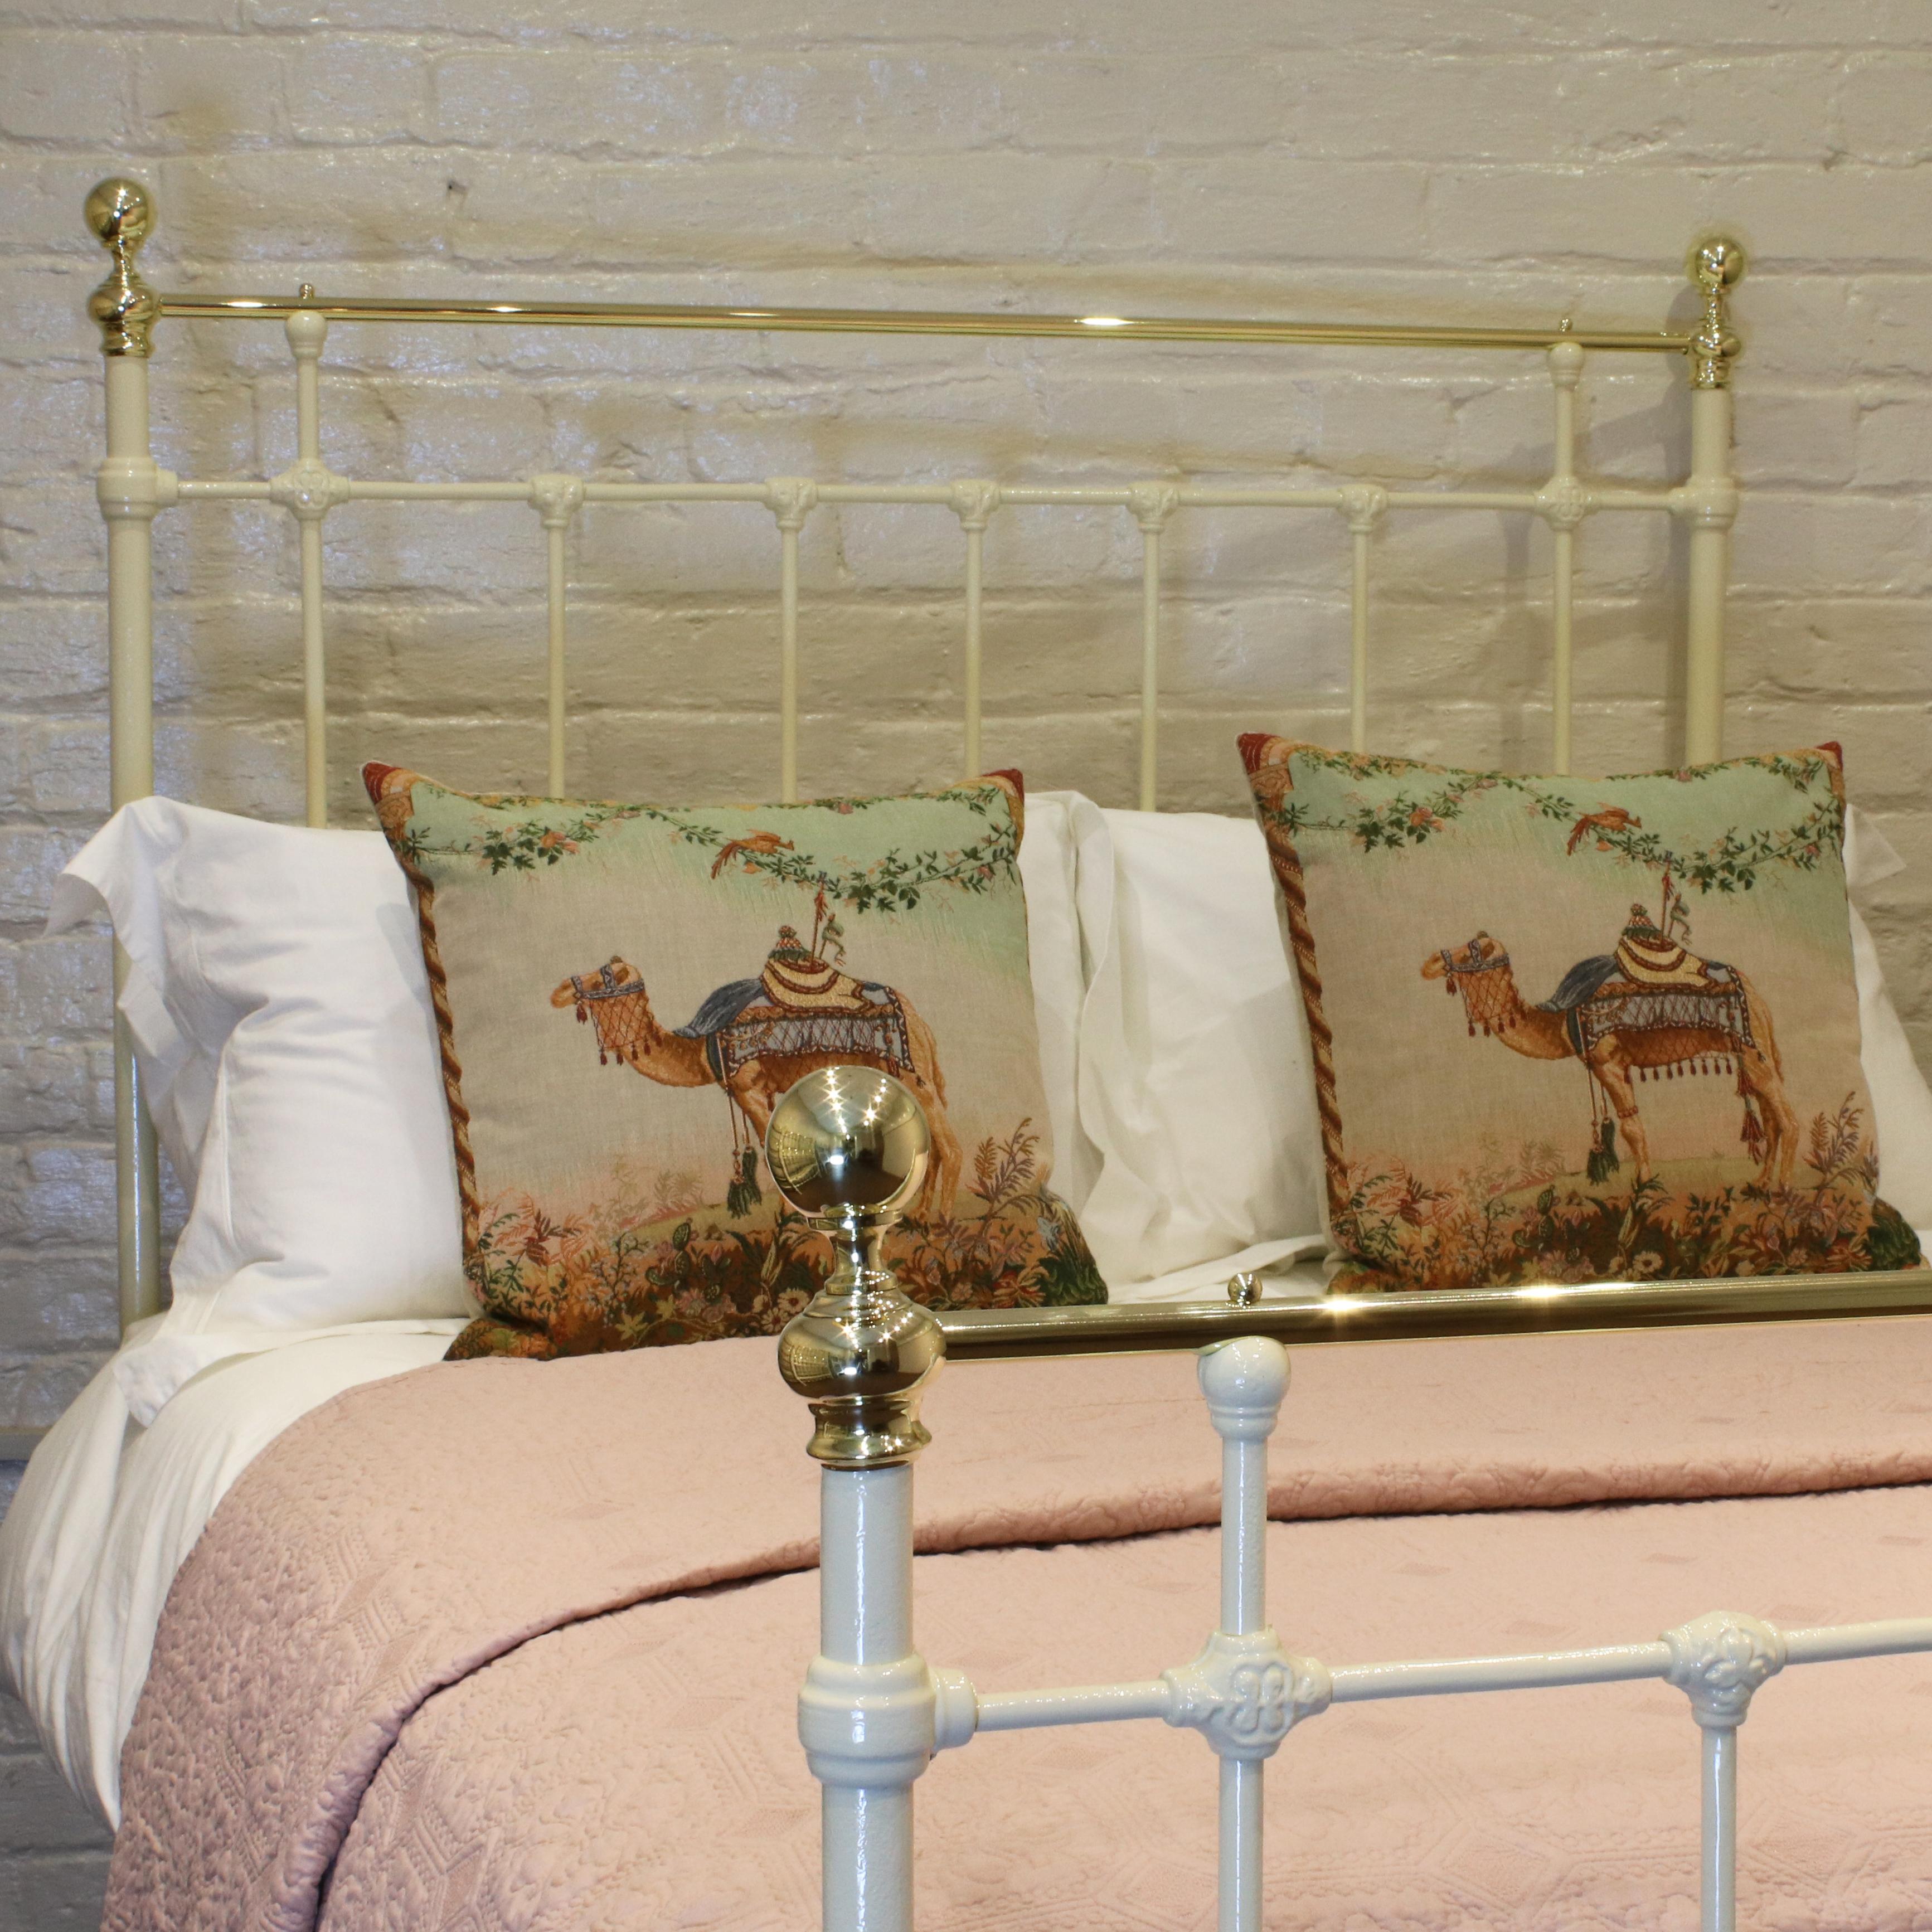 Double antique brass and iron bed in cream.

This bed accepts a double size (4ft 6in, 54 inches or 135cm) base and mattress.

The price is for the bed frame alone. The base, mattress, bedding and linen are extra and can be supplied.